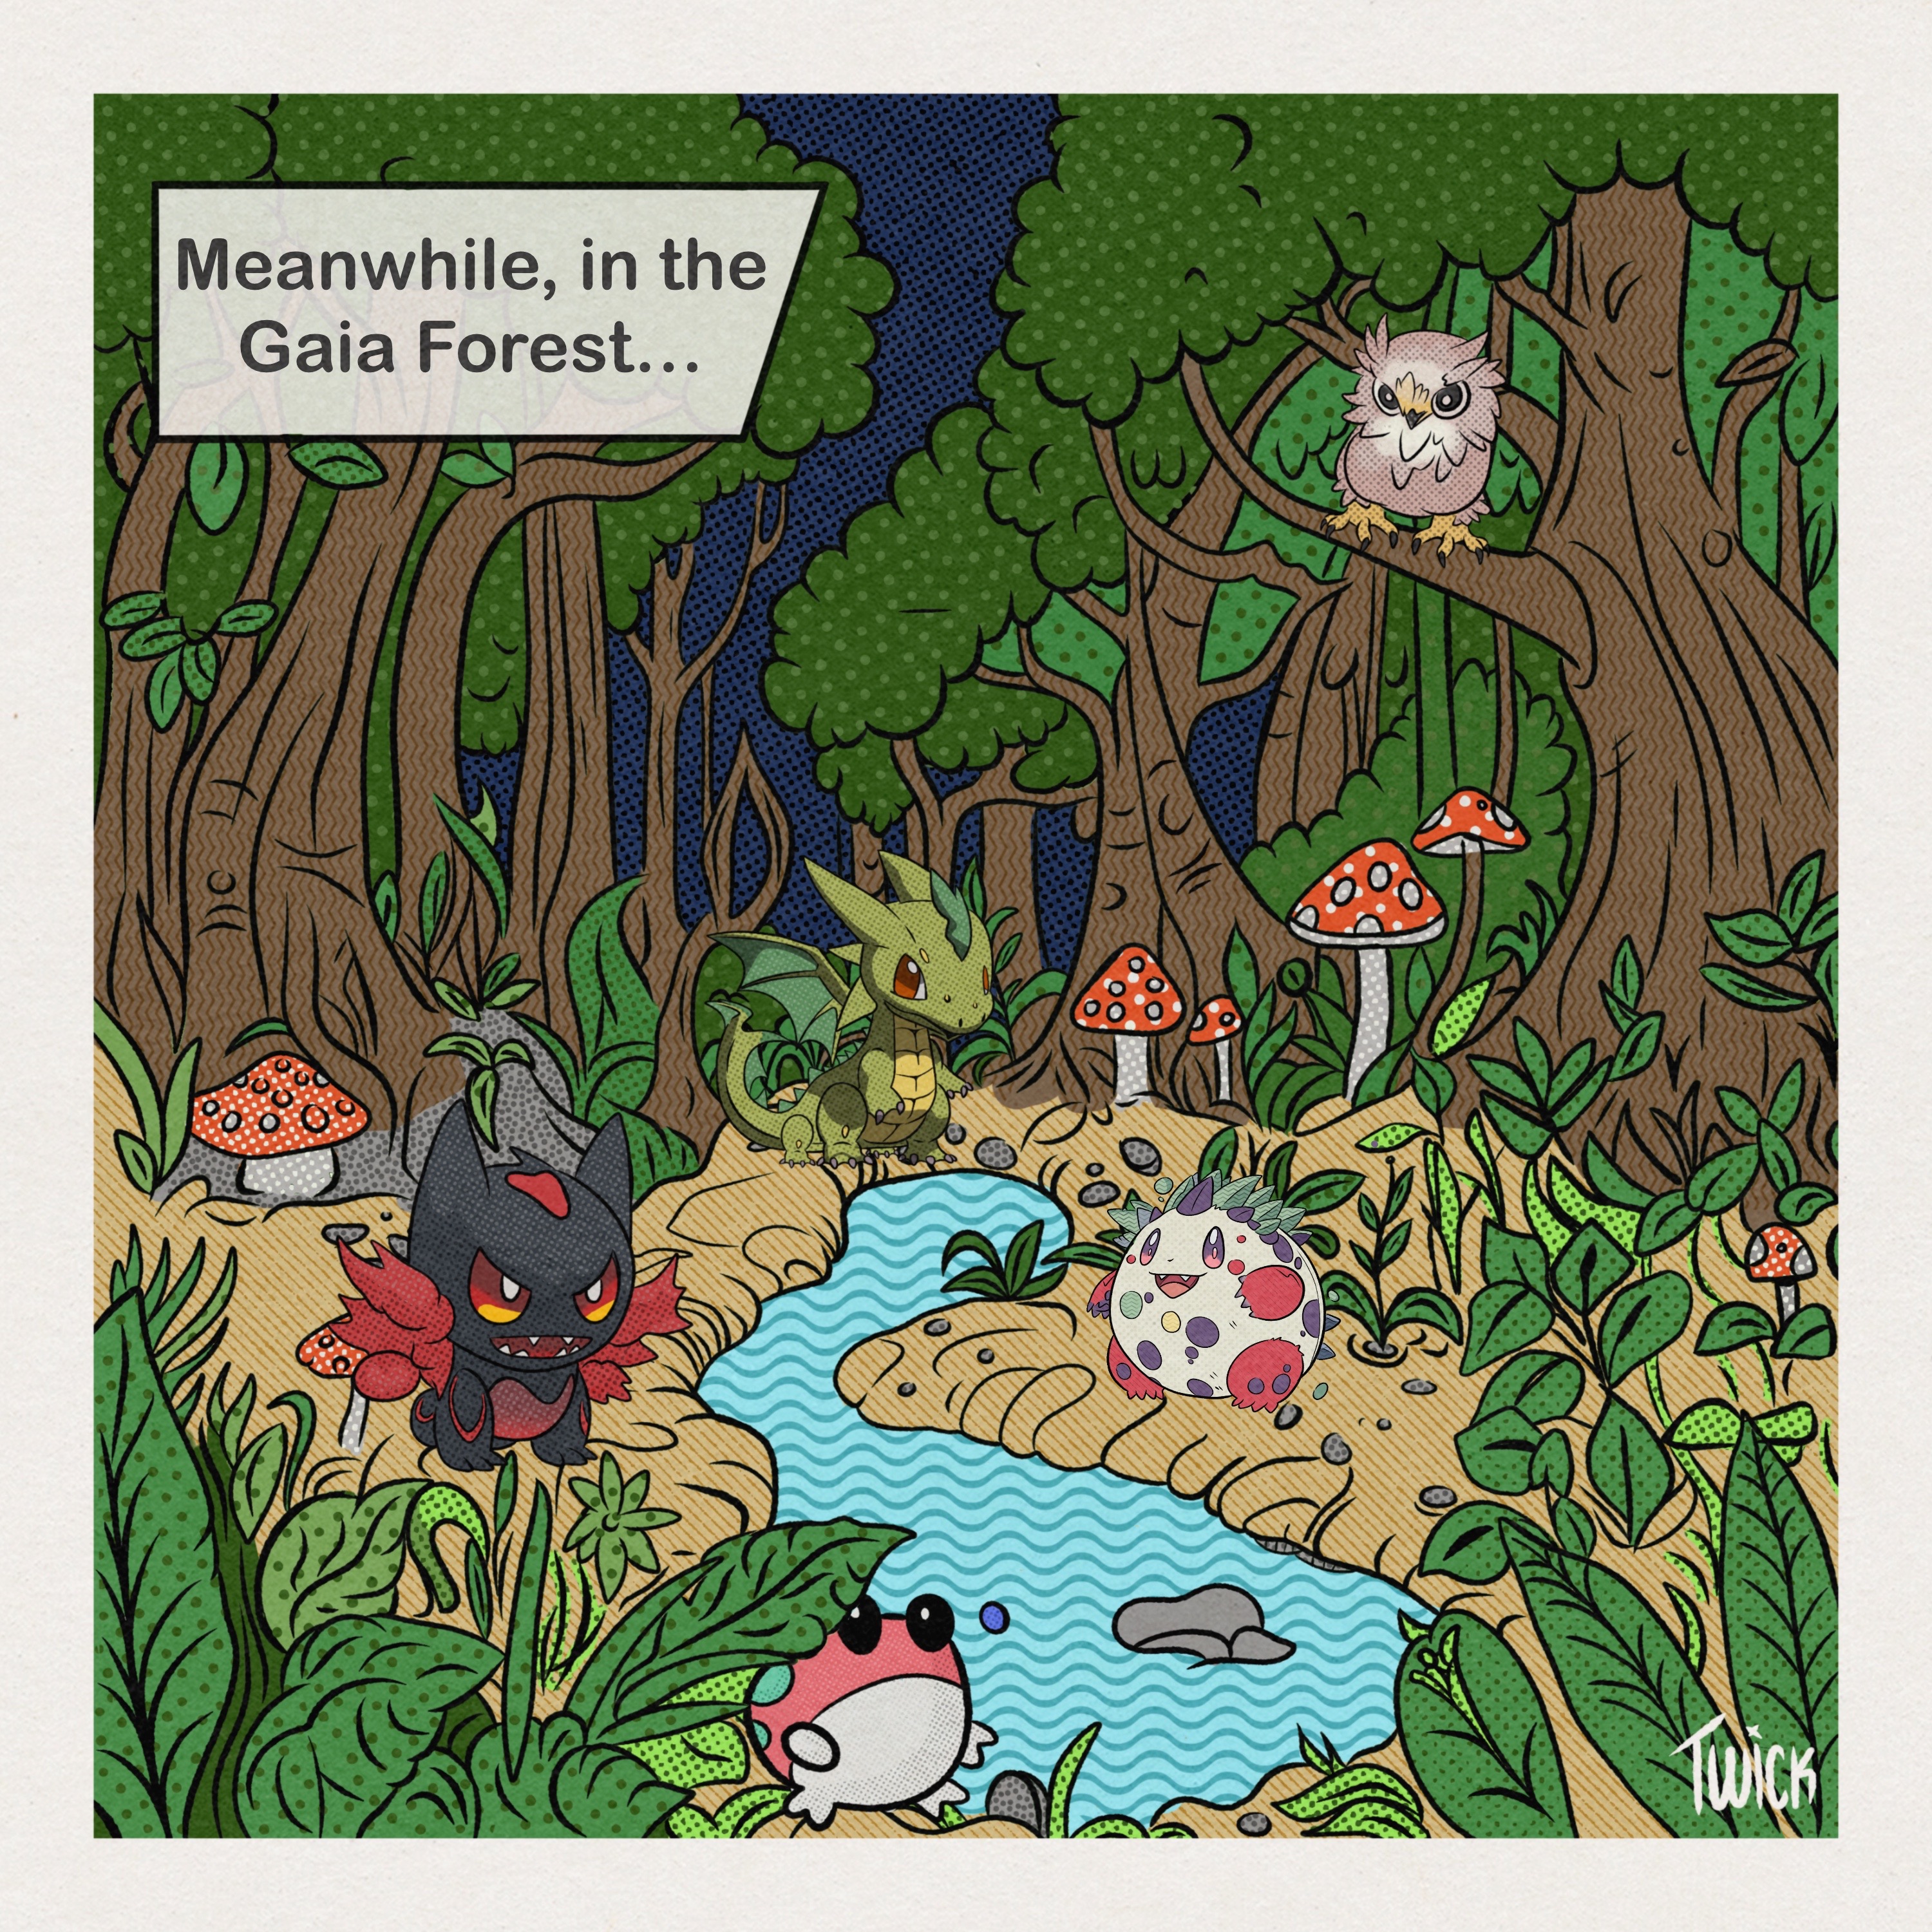 Location Lore #1-The Gaia Forest